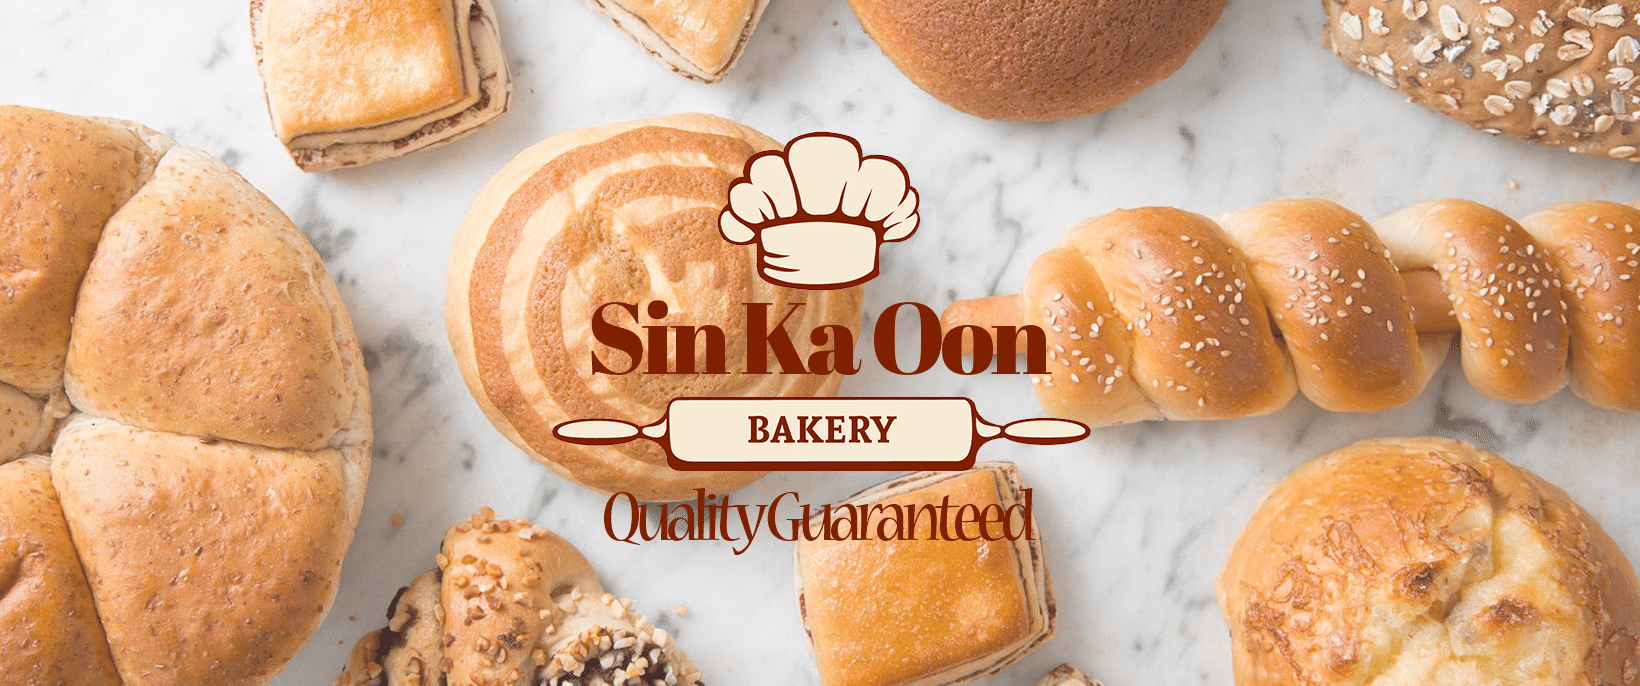 Grains clipart bread pastry production. Sin ka oon home